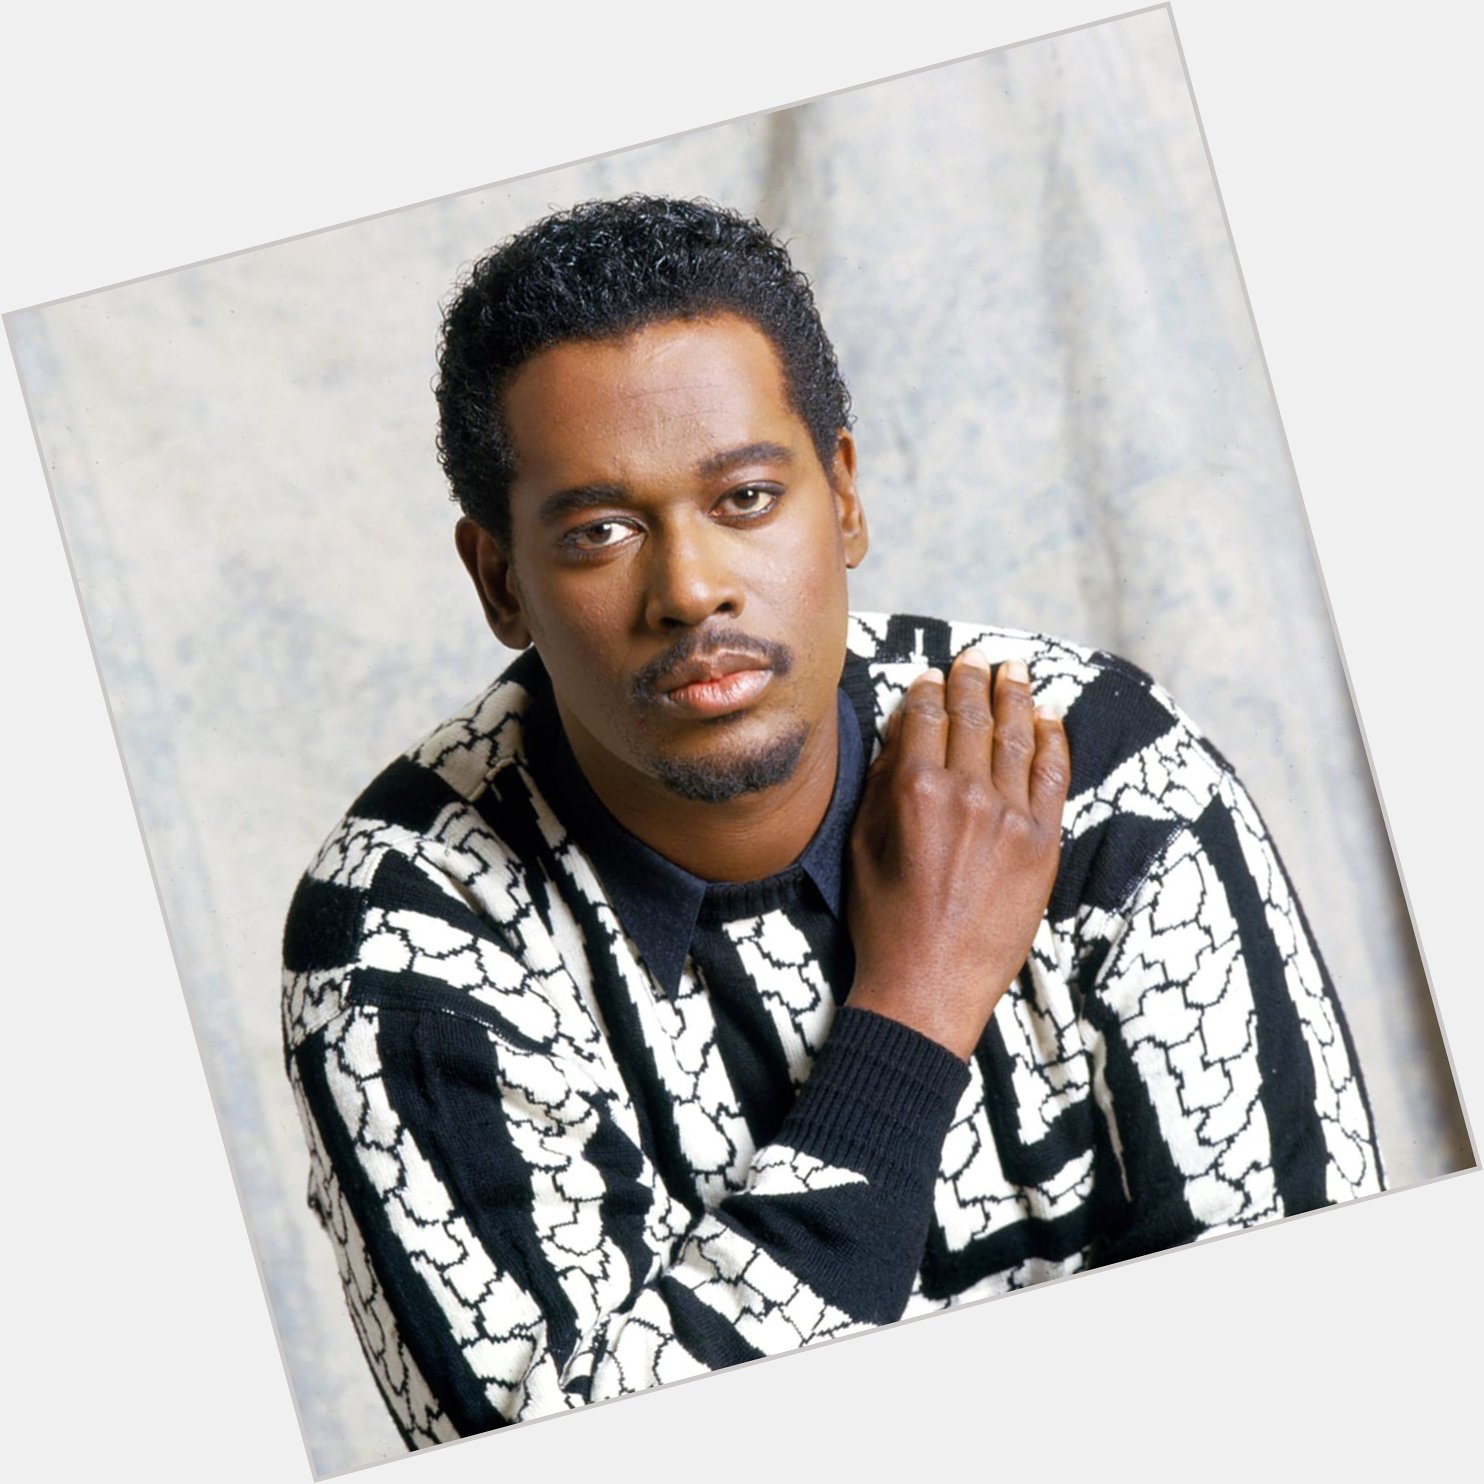 Happy Birthday to a masterclass vocalist, arranger, songwriter.. LUTHER VANDROSS 